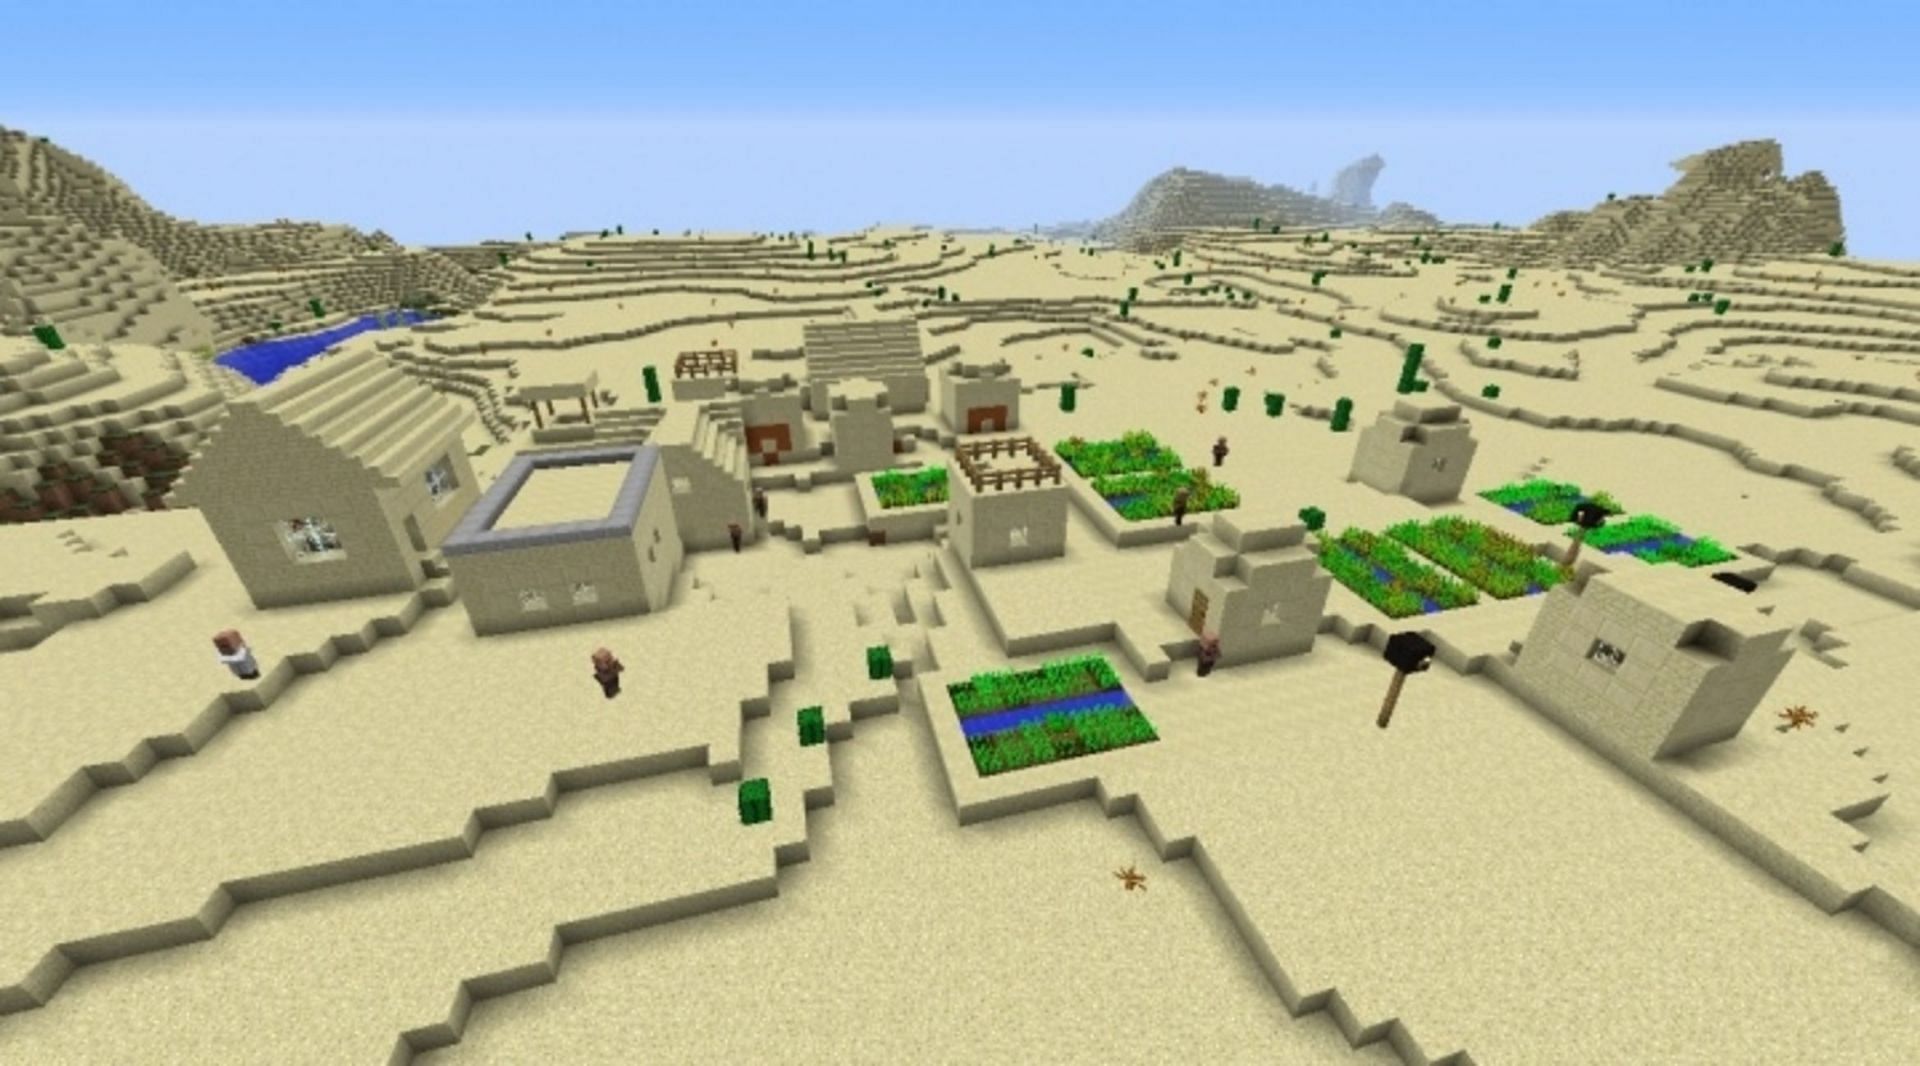 This desert seed has much more than players might first expect (Image via Mojang)